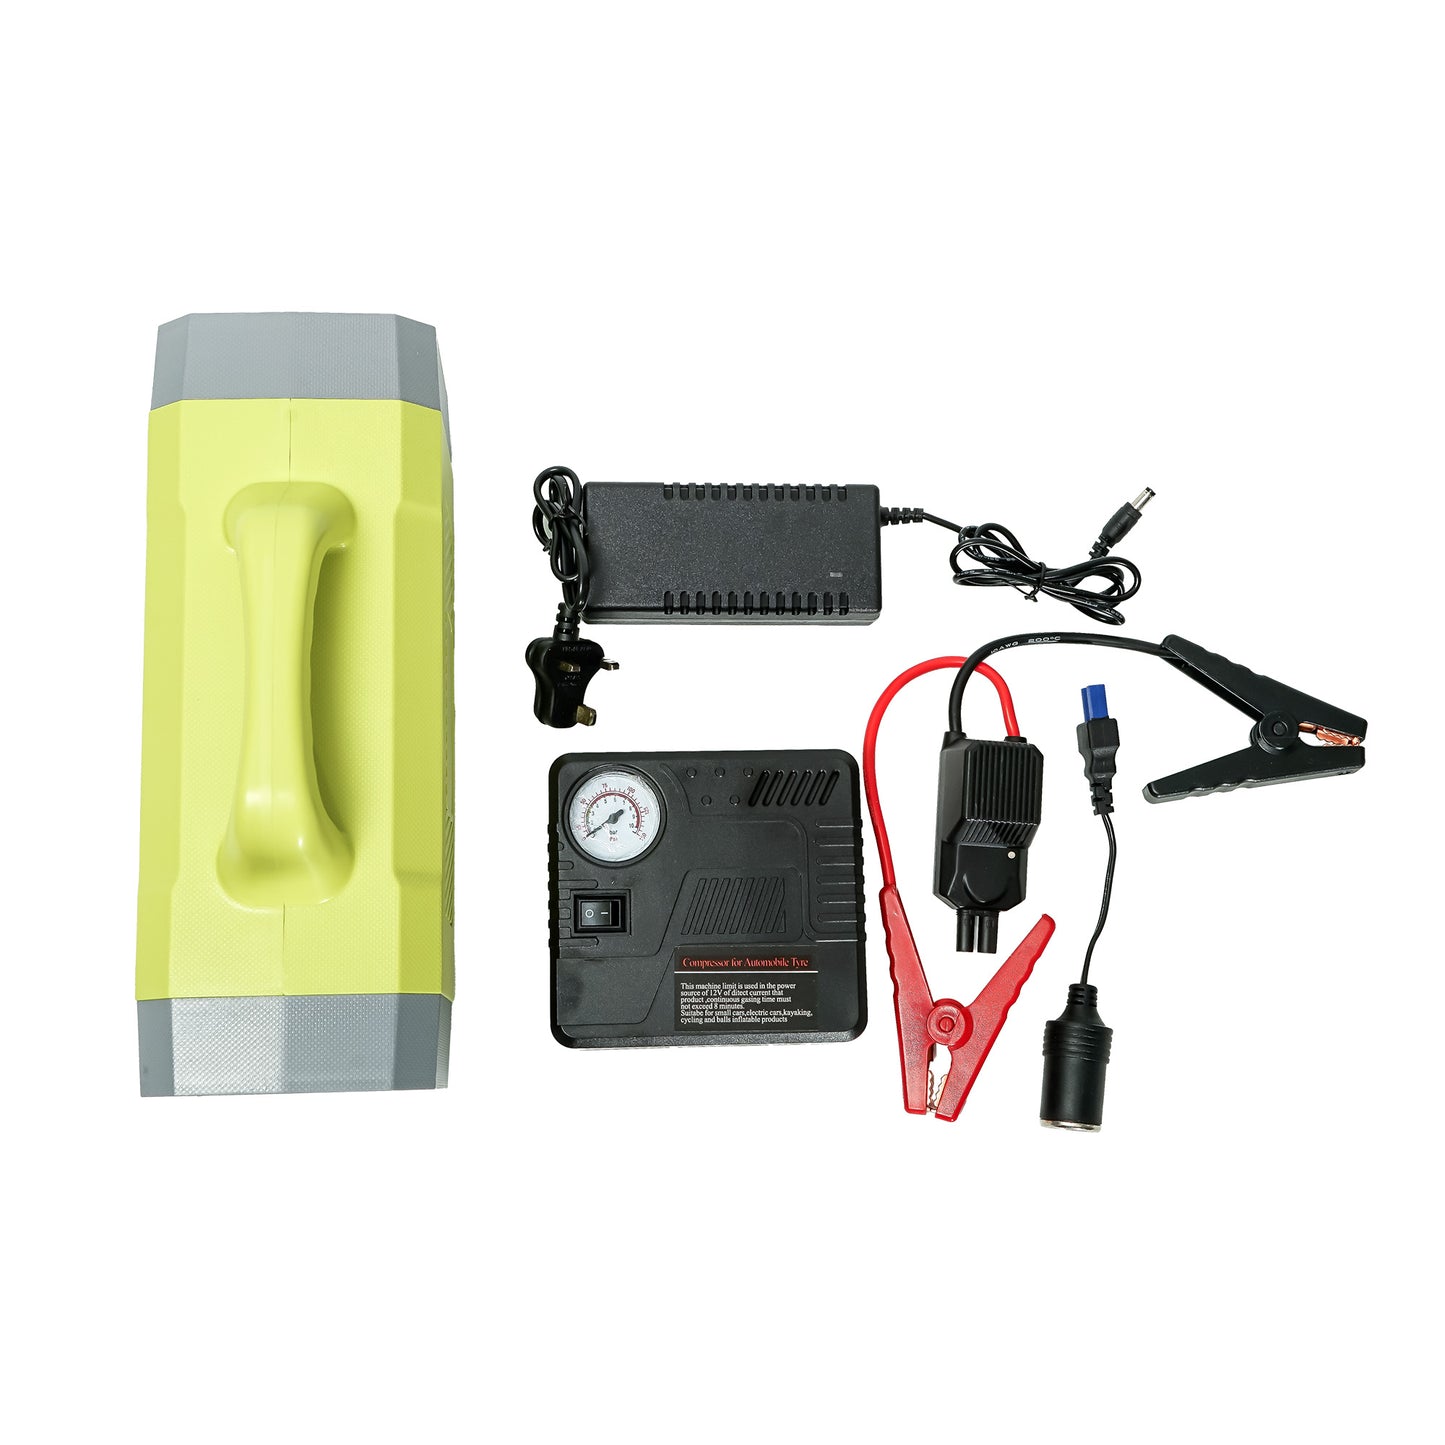 Crony  Multi-function K300 Portable Power Station 100W With Jump Starter  Battery For Camping